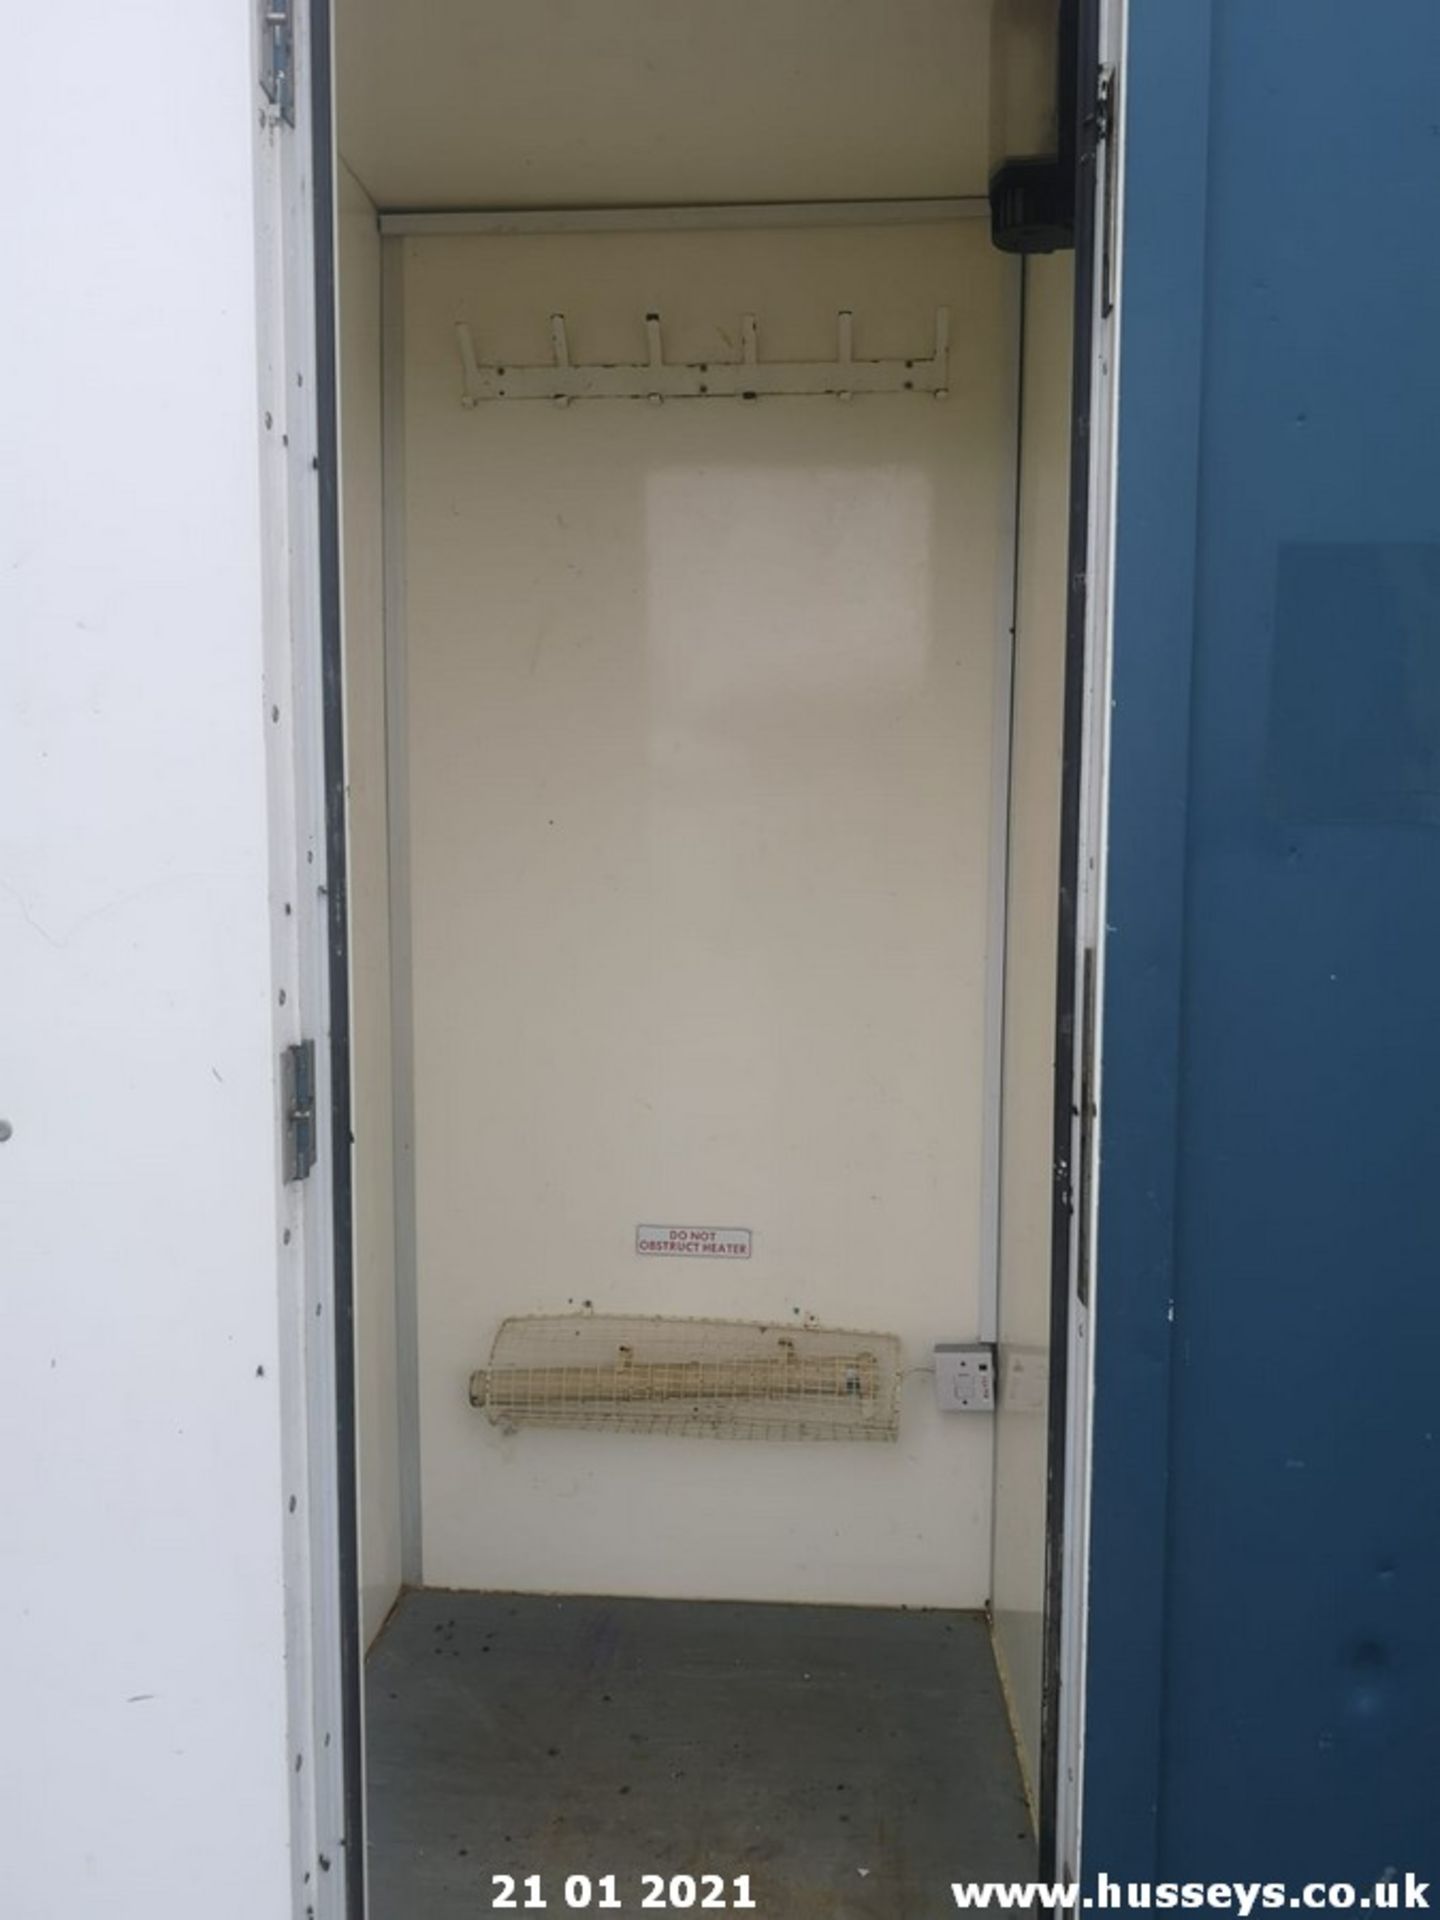 AJC FAST TOW WELFARE UNIT C/W SINK, MICROWAVE, HEATER. HYDRAULIC LOWERS TO GROUND TOILET - Image 6 of 8